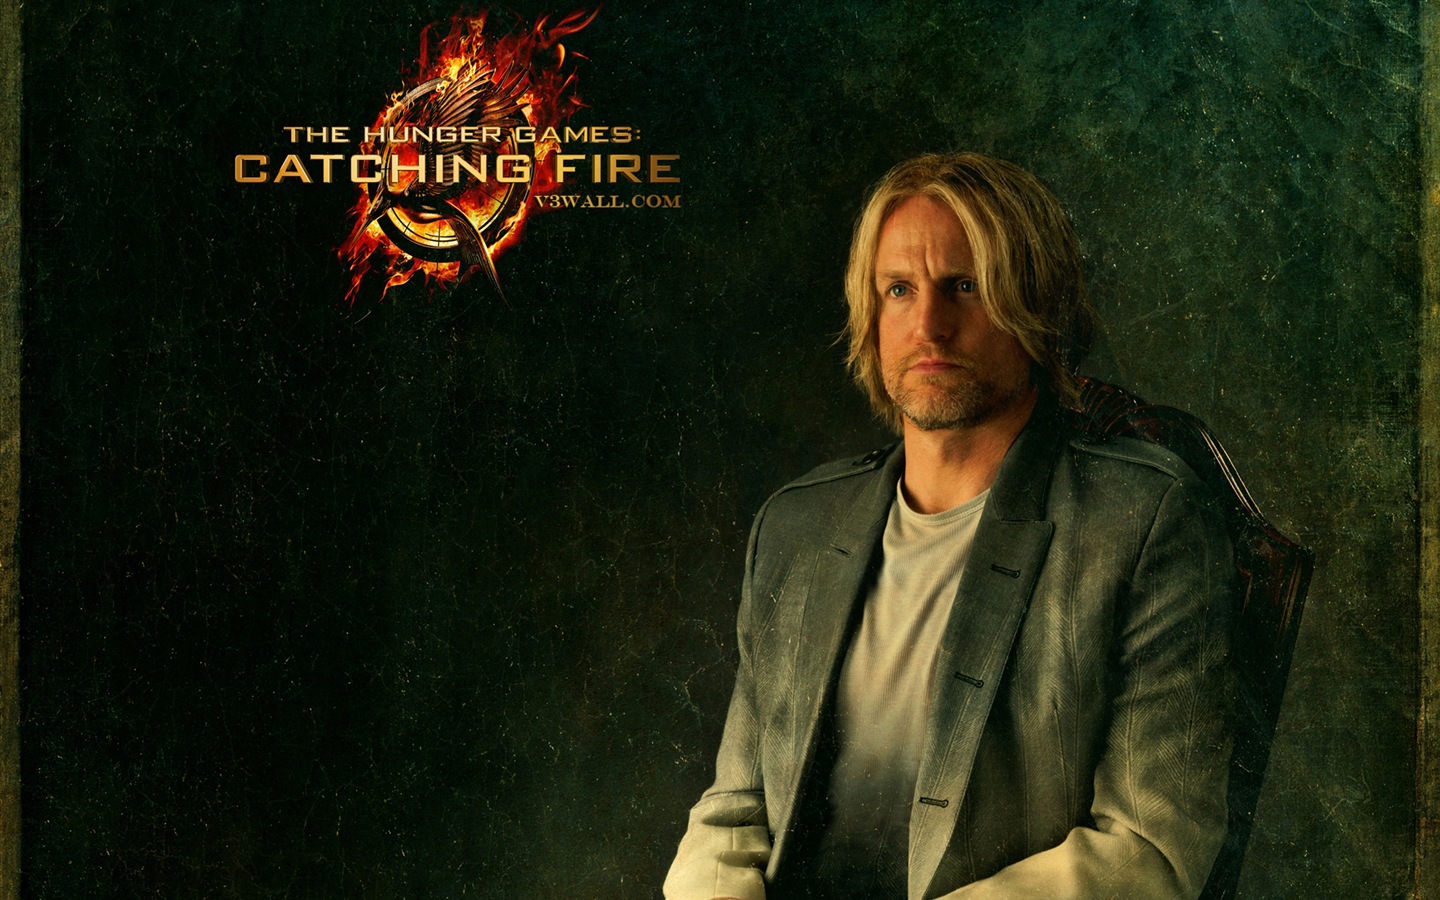 The Hunger Games: Catching Fire wallpapers HD #12 - 1440x900